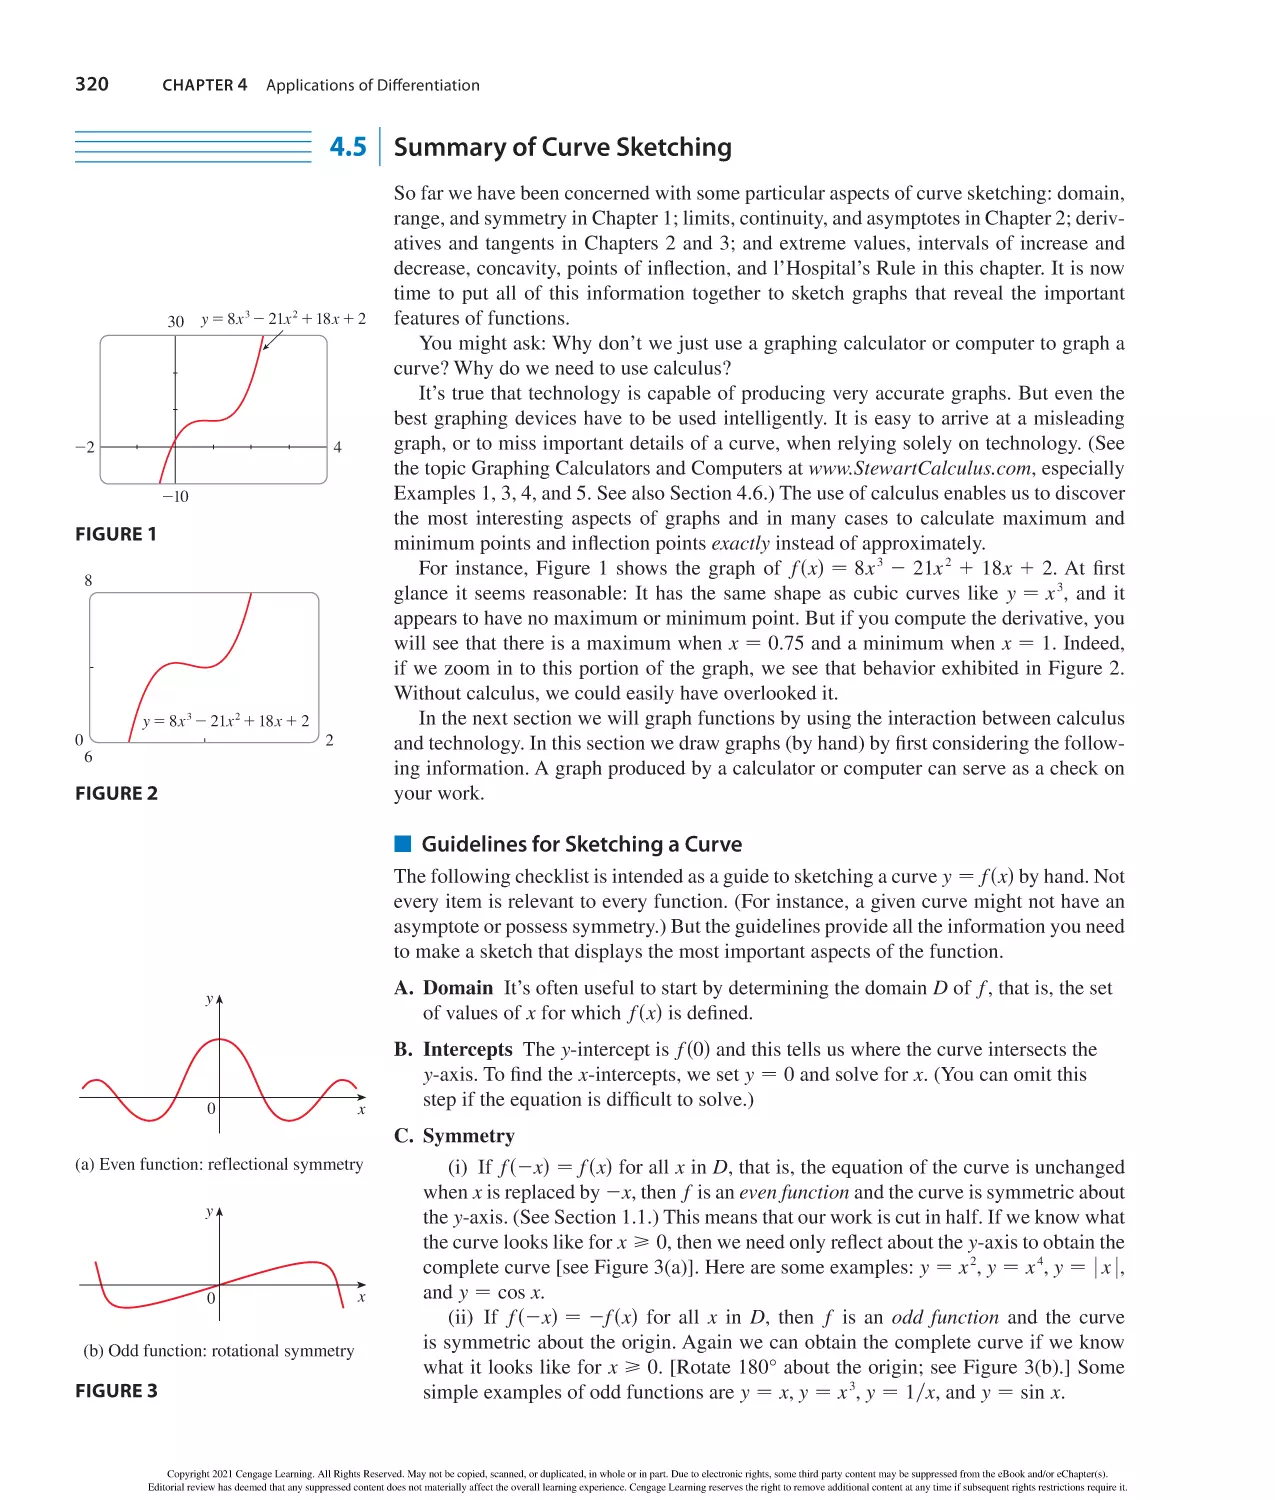 4.5 Summary of Curve Sketching